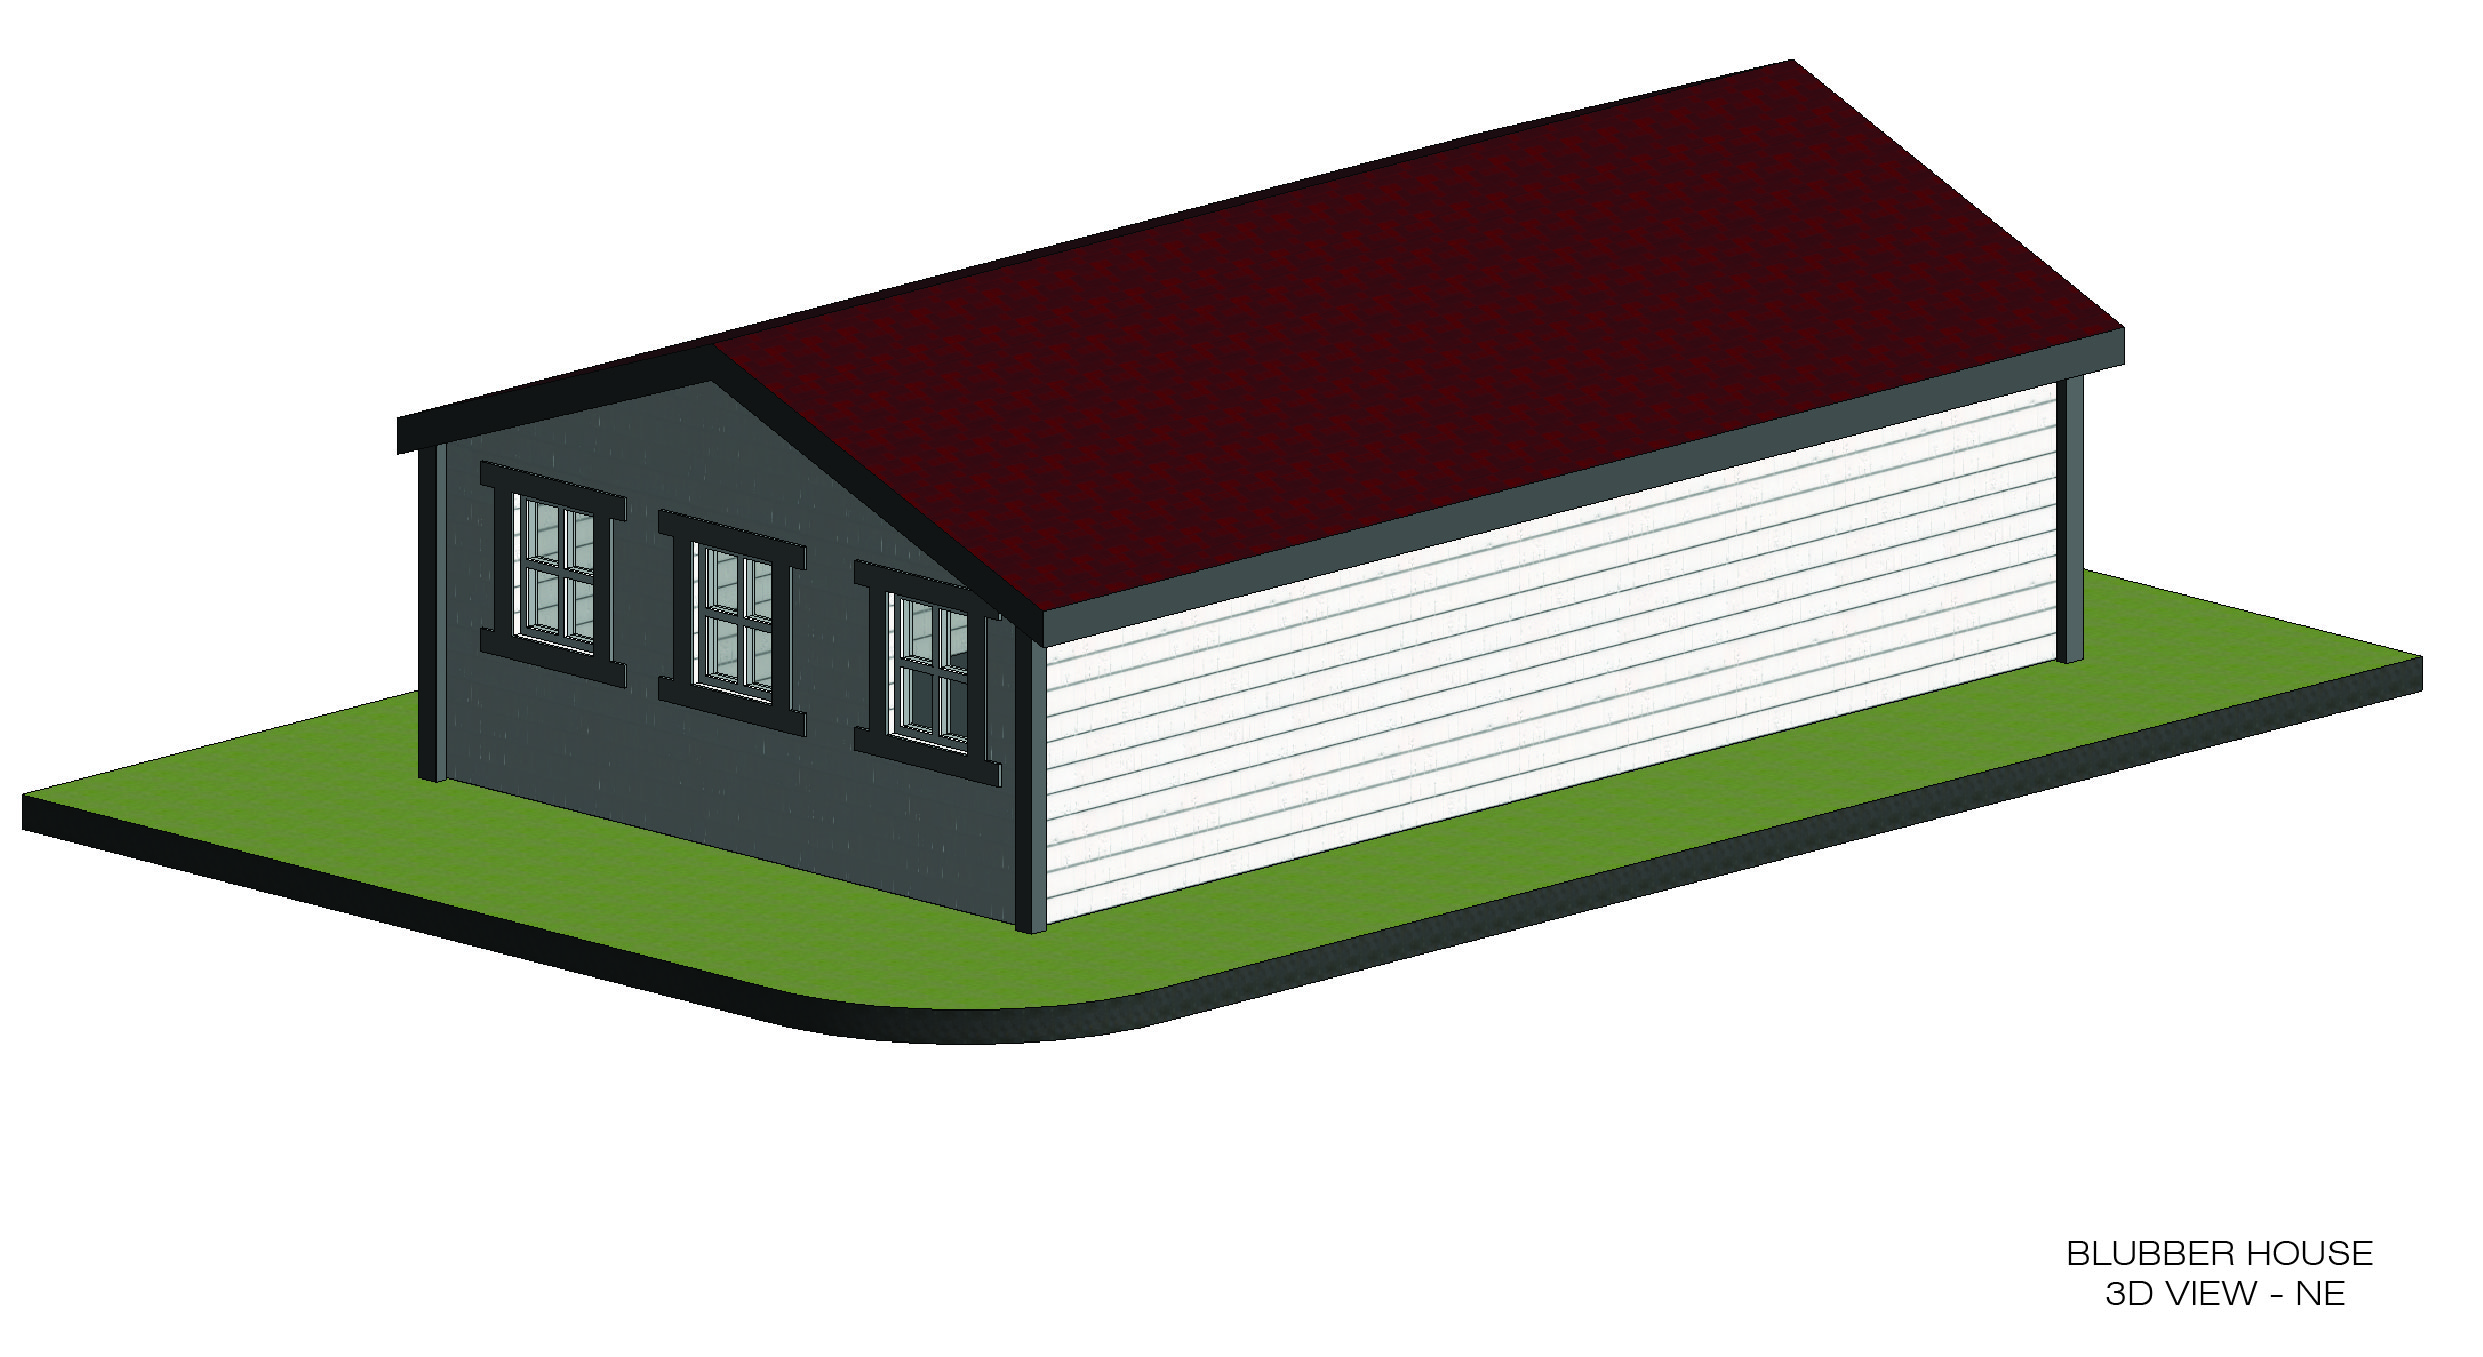 3D view of the northeast corner of the blubber house, created in Revit based off the documentation with the terrestrial laser scanner.